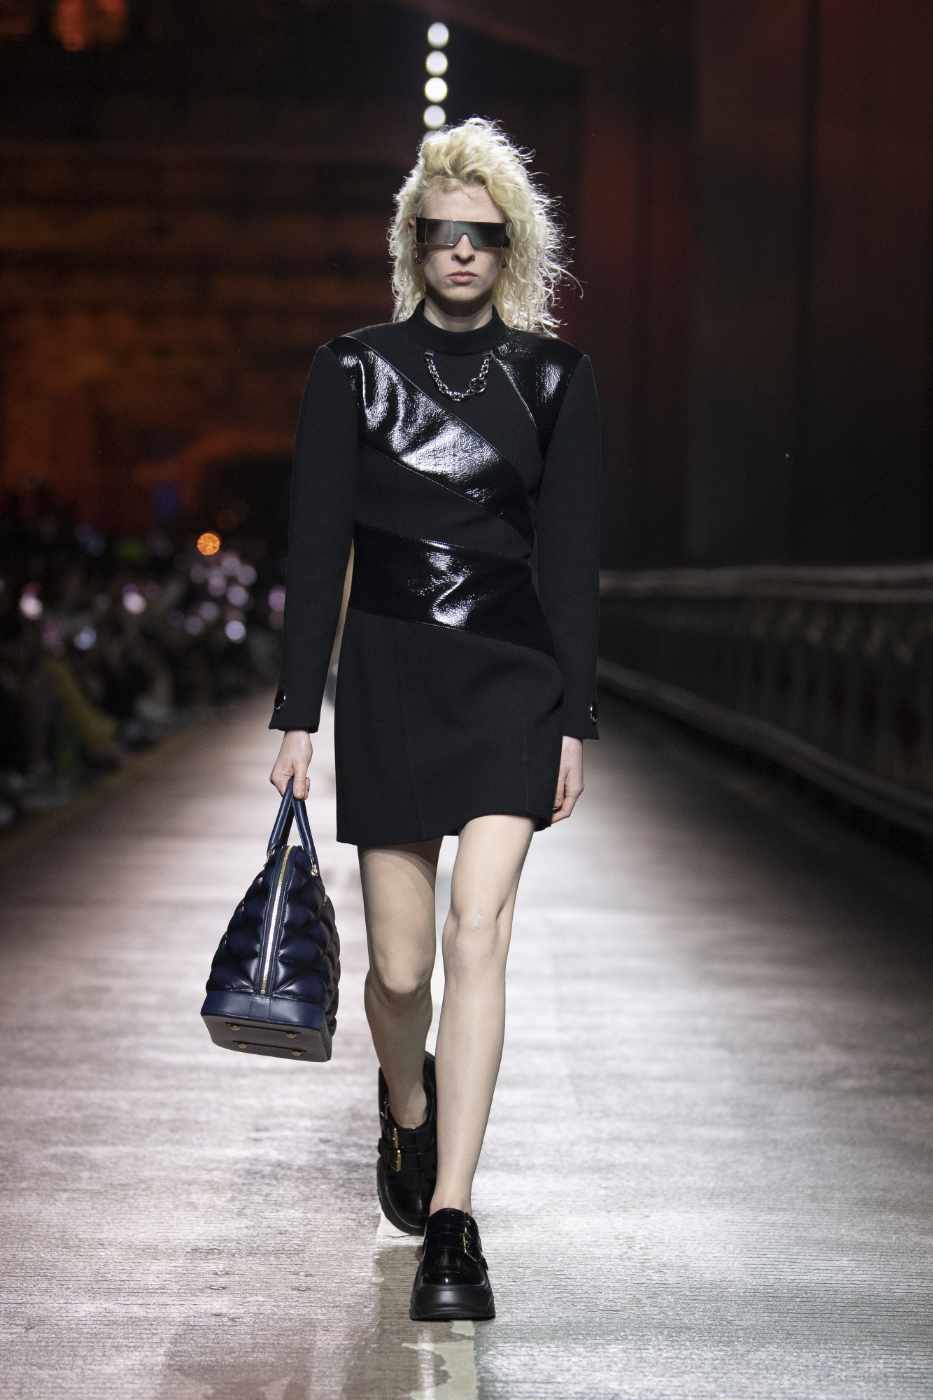 Super excited! Louis Vuitton launches LV², an eclectic Pre-Fall